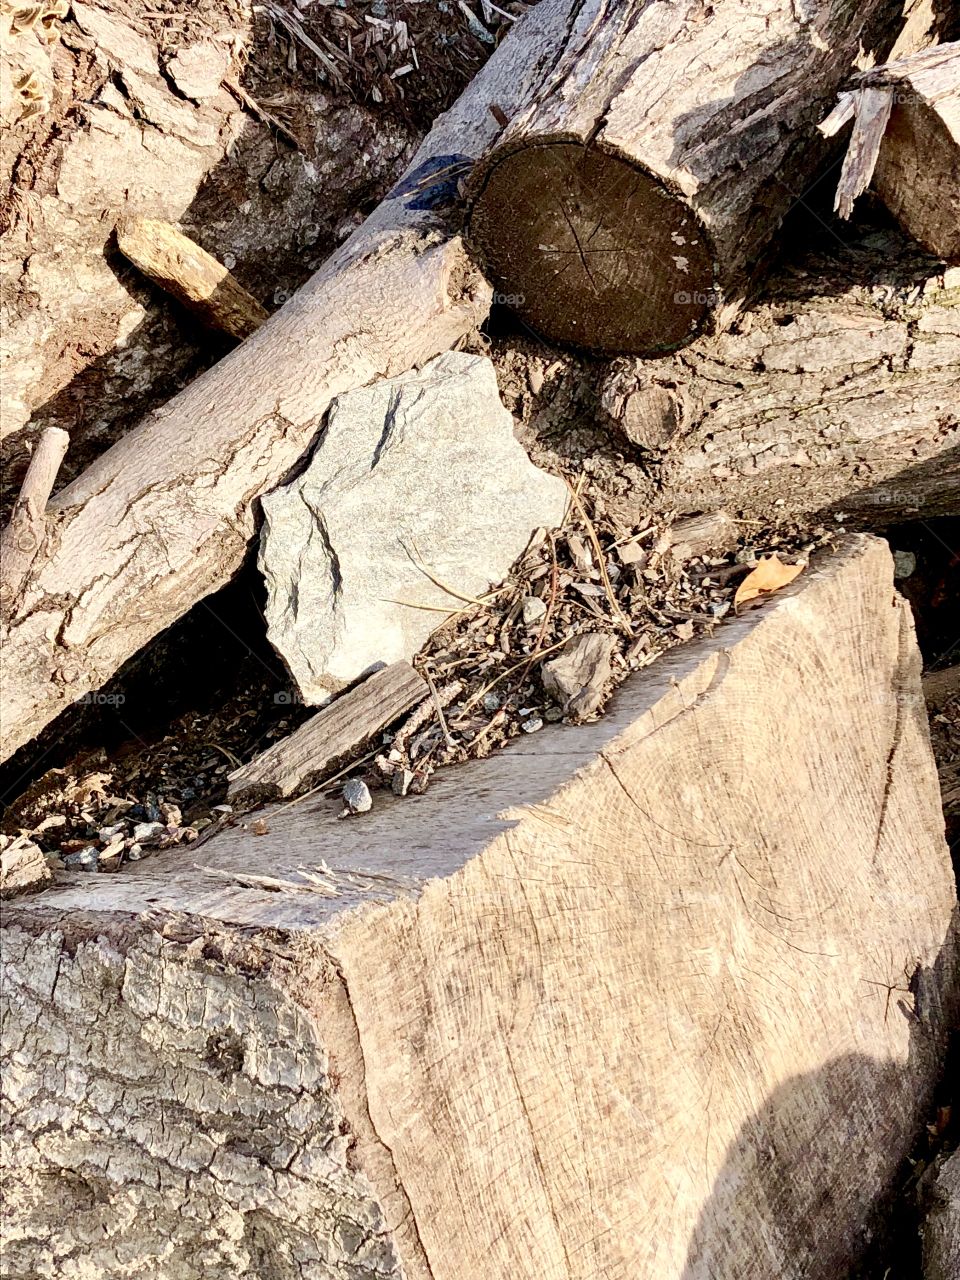 Pieces of stone and wood